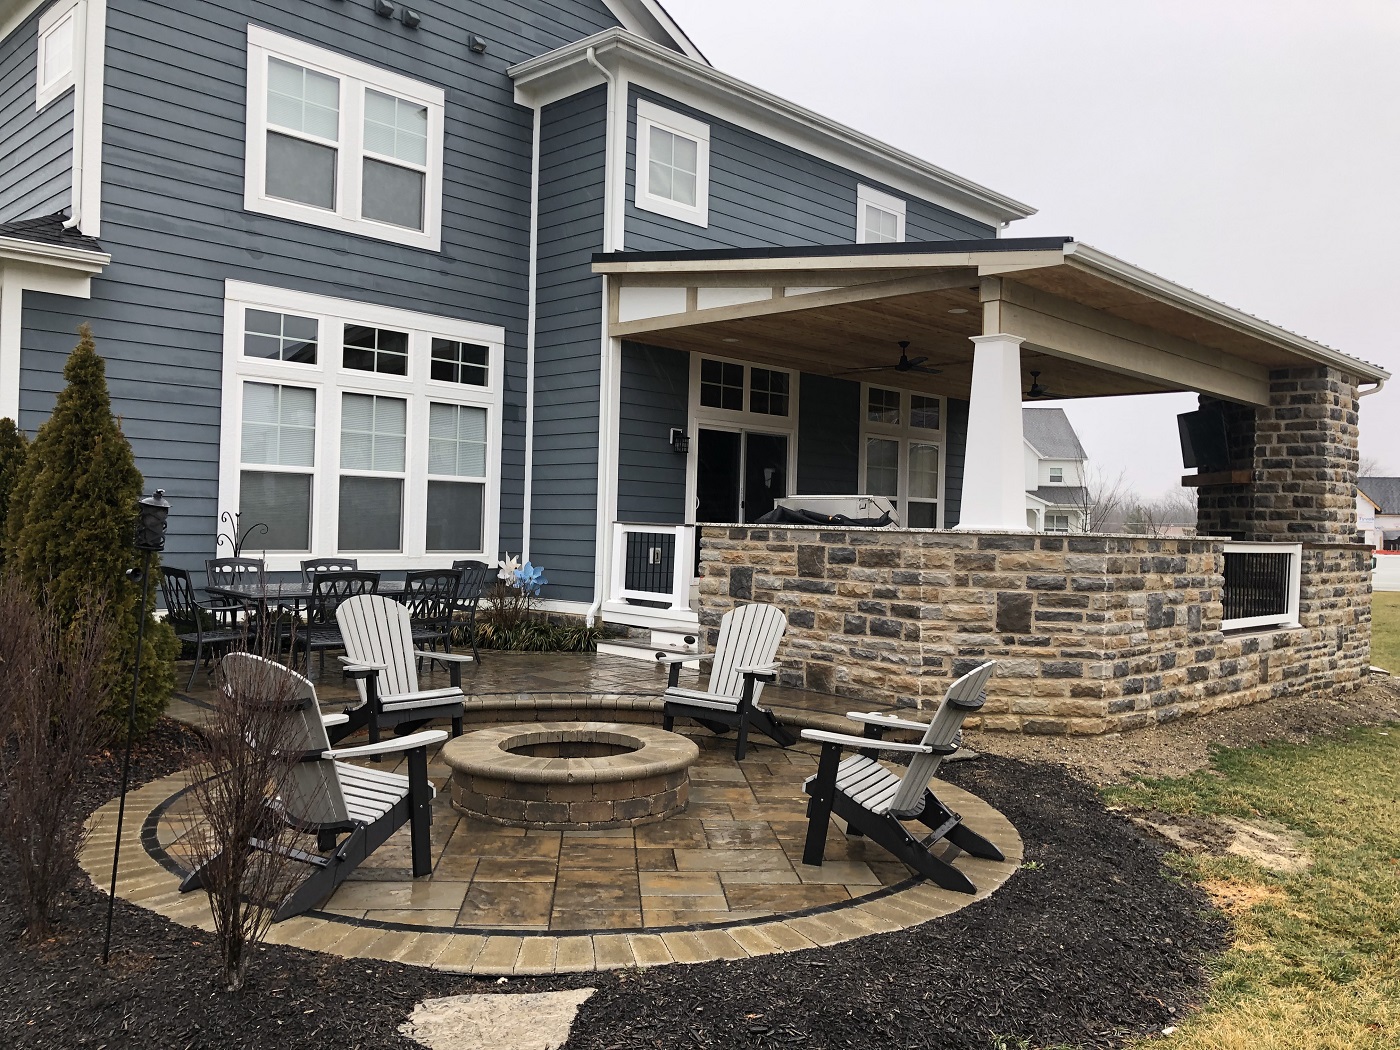 Will A New Deck Or Patio Add Value To My Home?